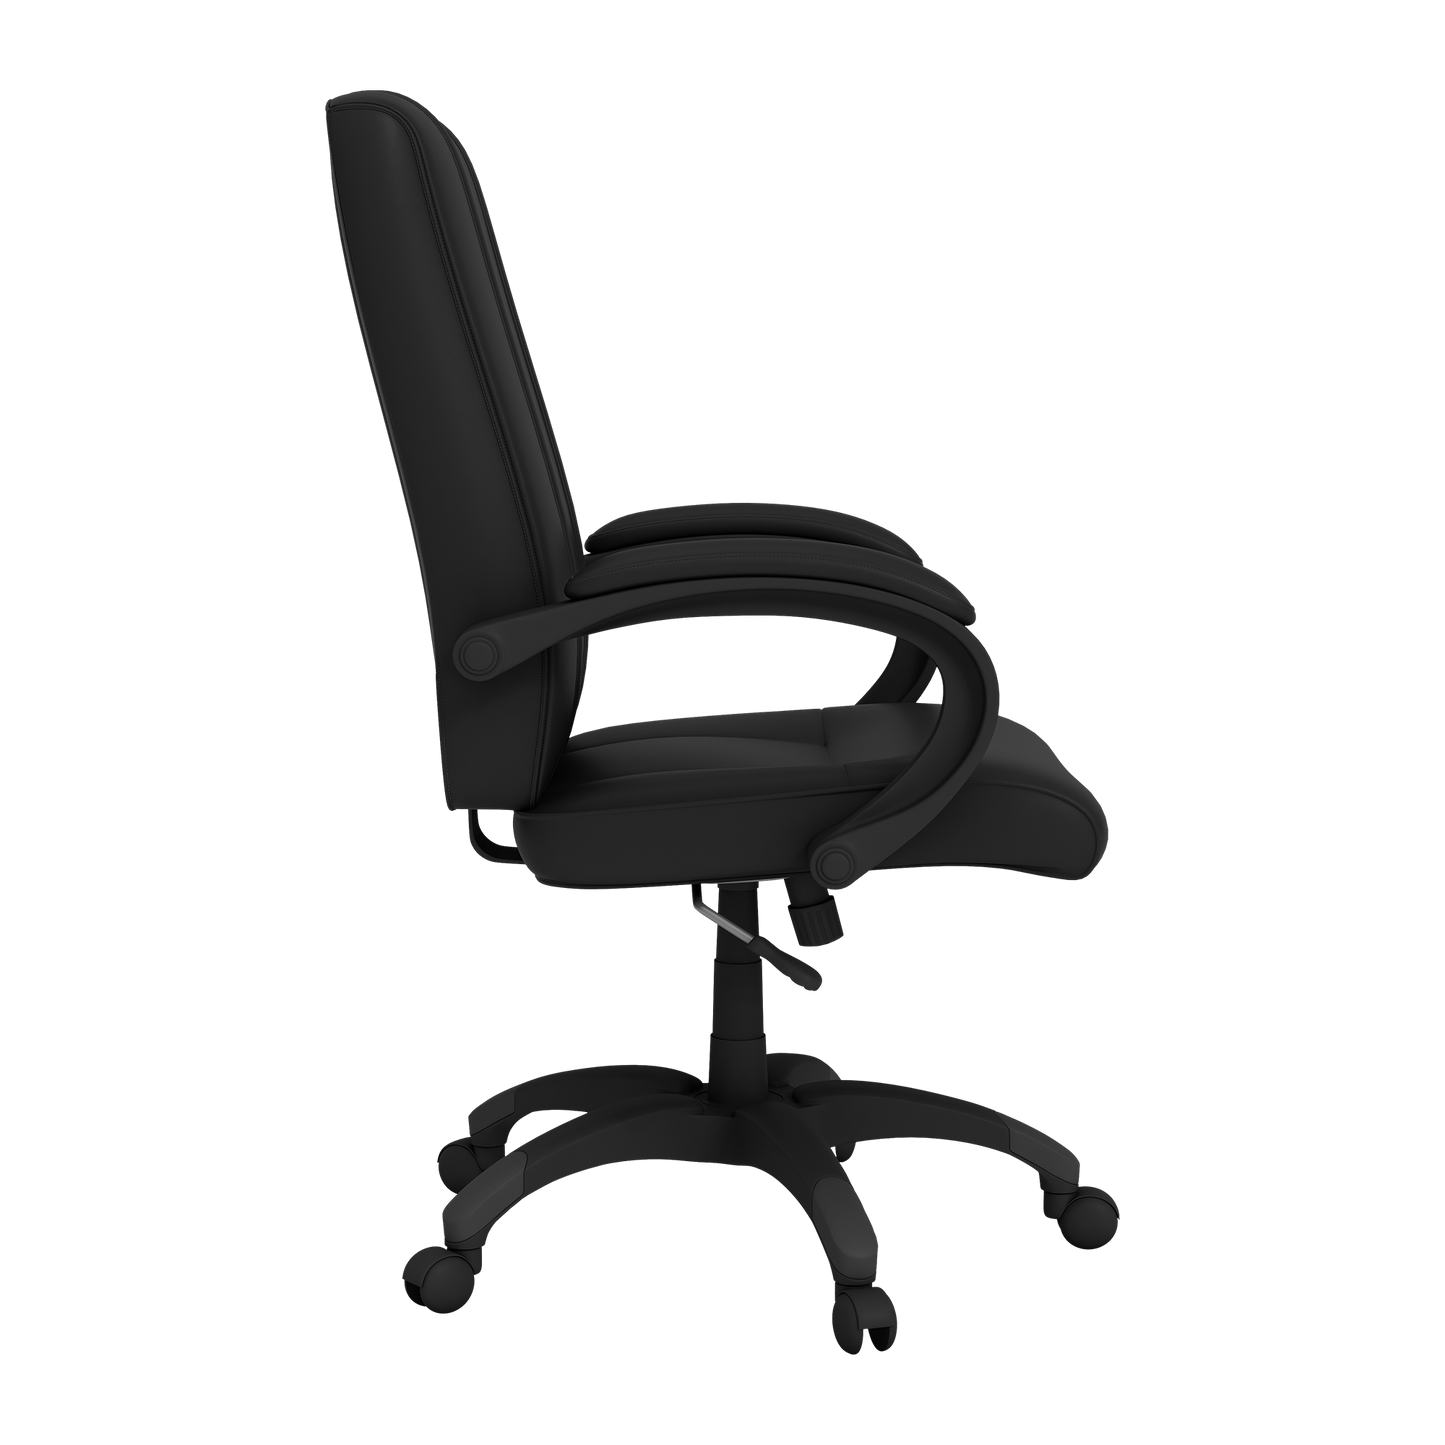 Office Chair 1000 with Atlanta Braves 2021 World Champions Logo